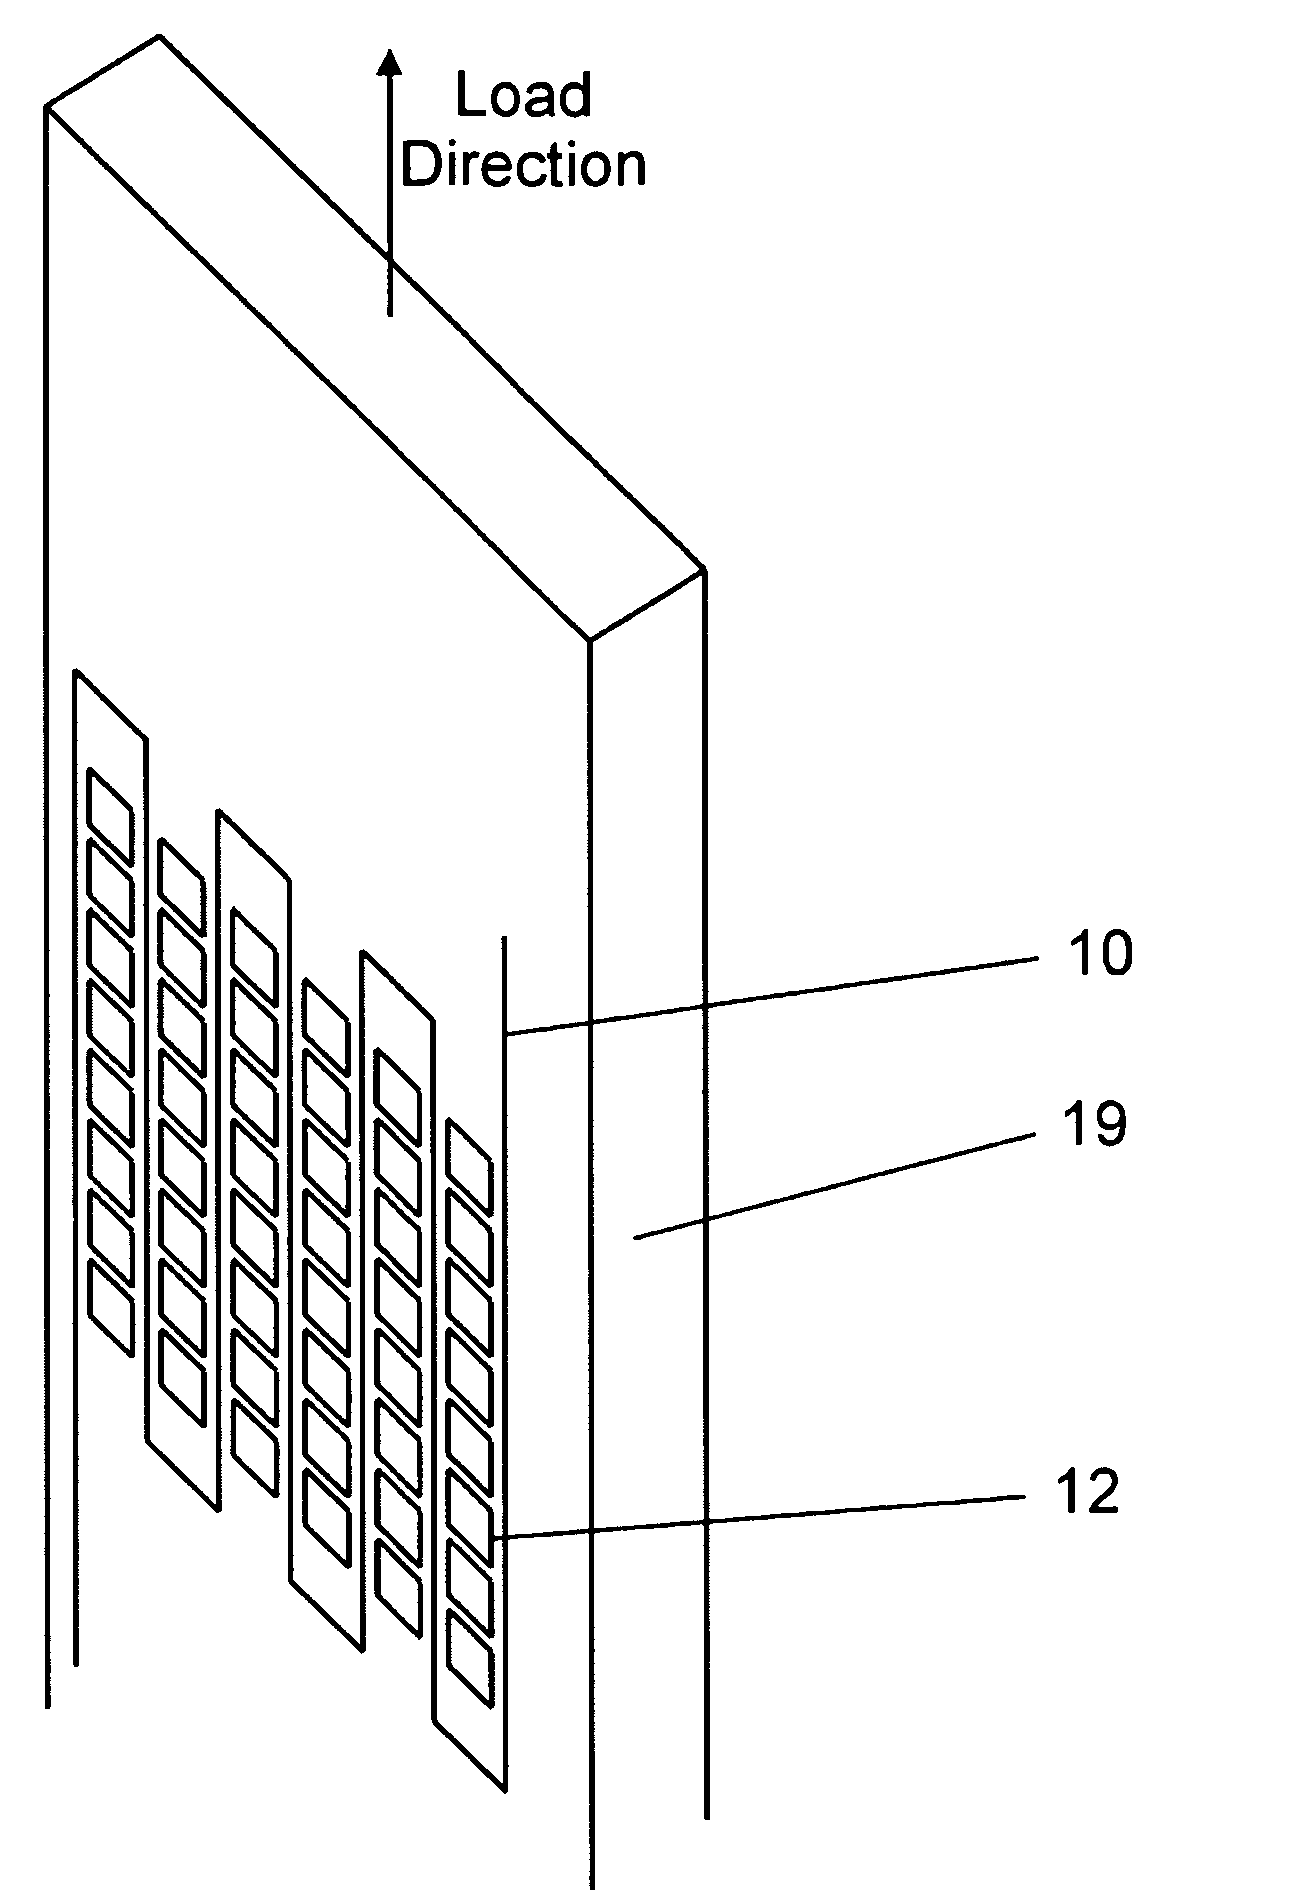 Material condition monitoring with multiple sensing modes